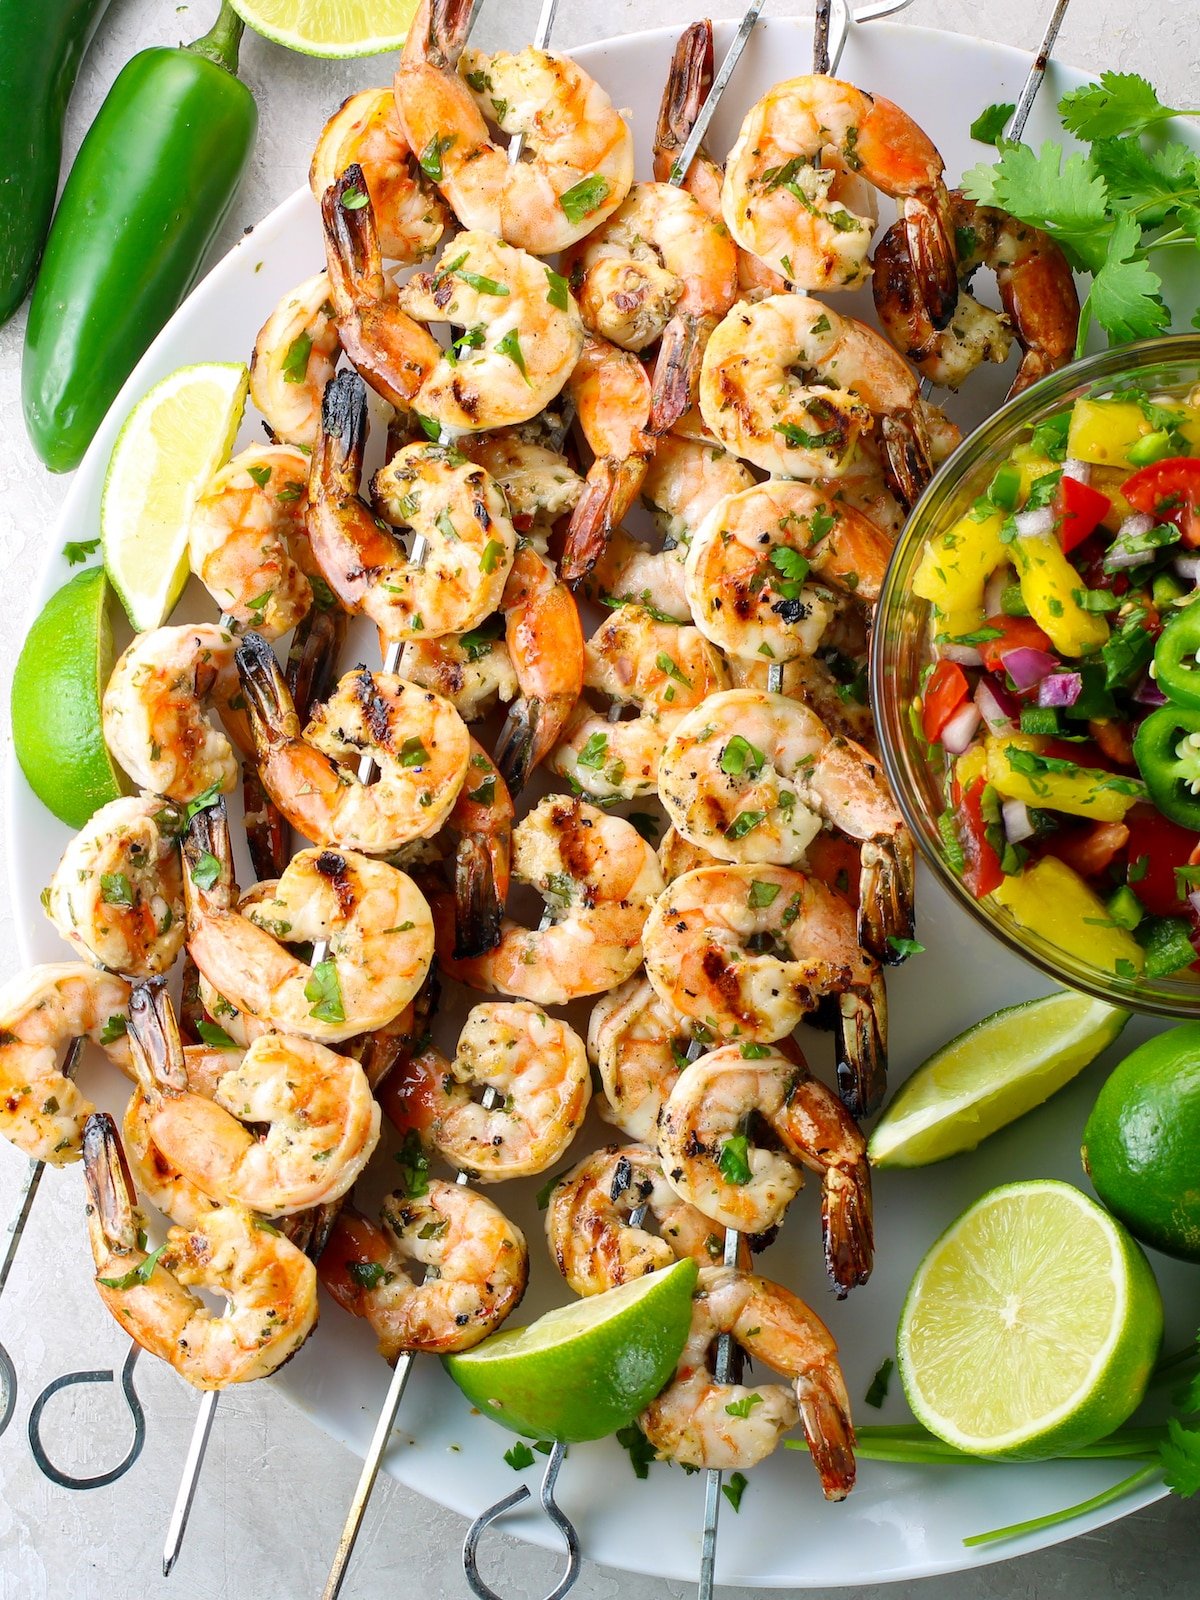 A platter of grilled shrimp on skewers with pineapple salsa and lime, cilantro, and jalapeno garnish.